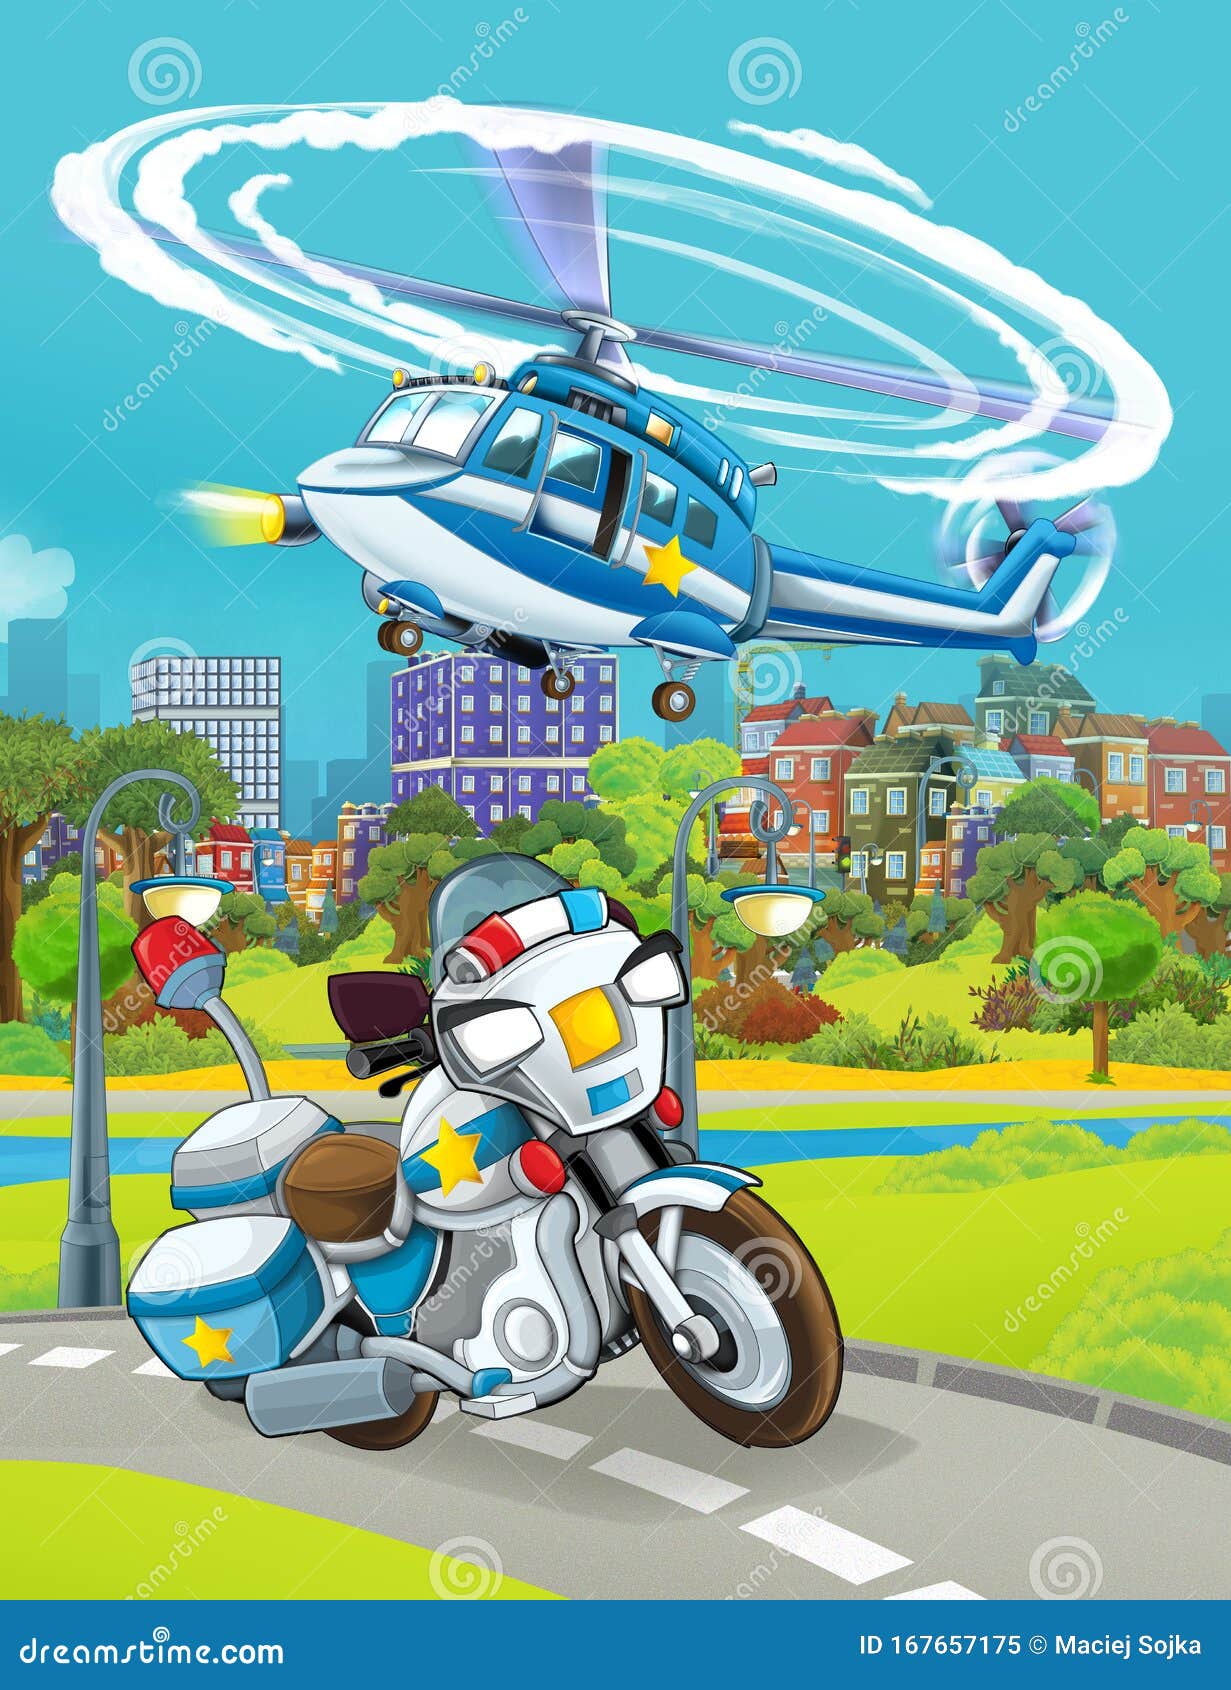 Cartoon Scene with Police Car Vehicle and Helicopter or Plane Working -  Illustration Stock Illustration - Illustration of brigade, beauty: 167657175